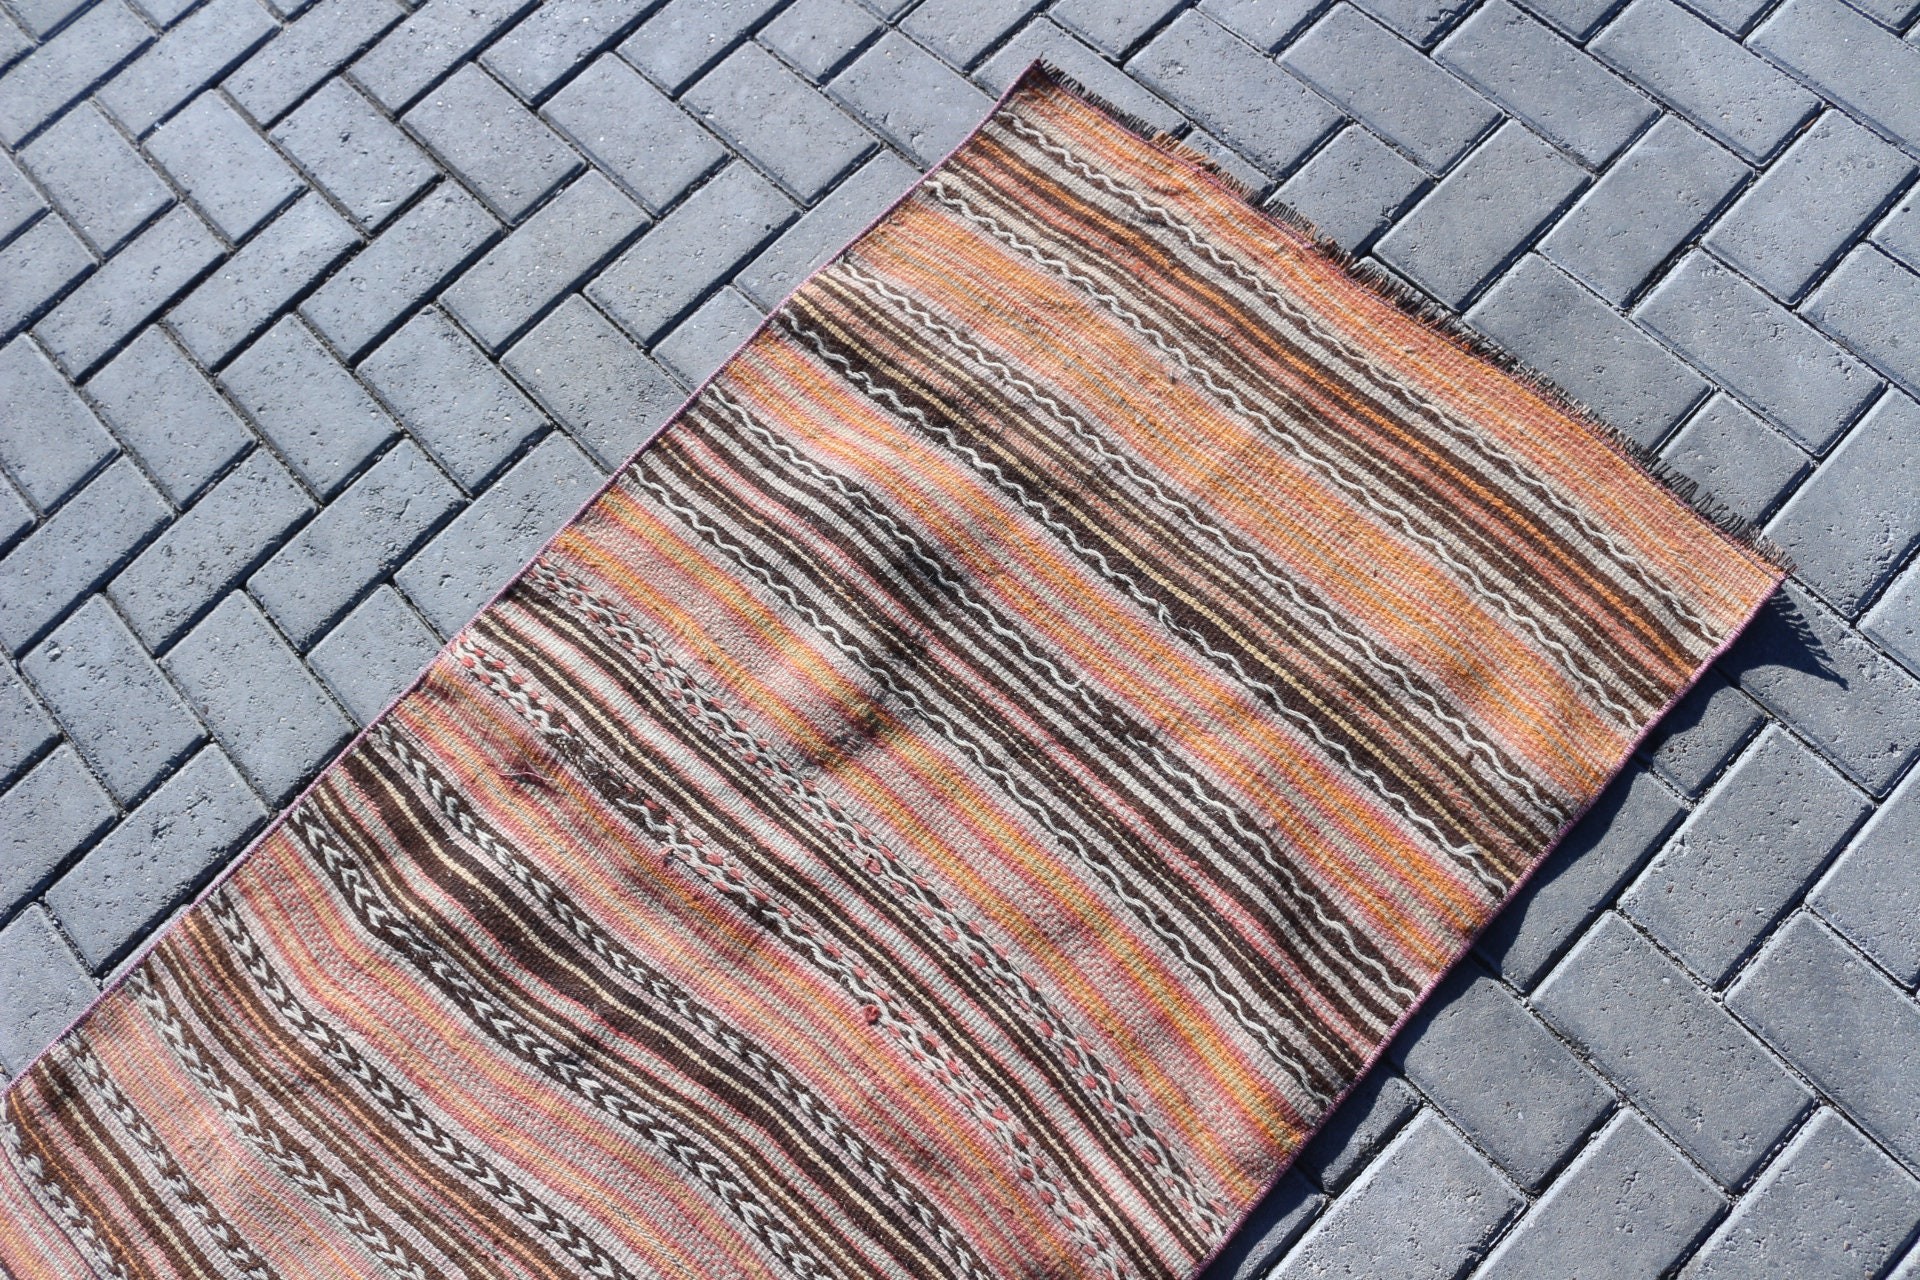 Car Mat Rug, Brown Moroccan Rugs, Wool Rug, Vintage Rug, Kilim, Old Rug, 2.6x5.3 ft Small Rugs, Rugs for Entry, Turkish Rug, Kitchen Rug